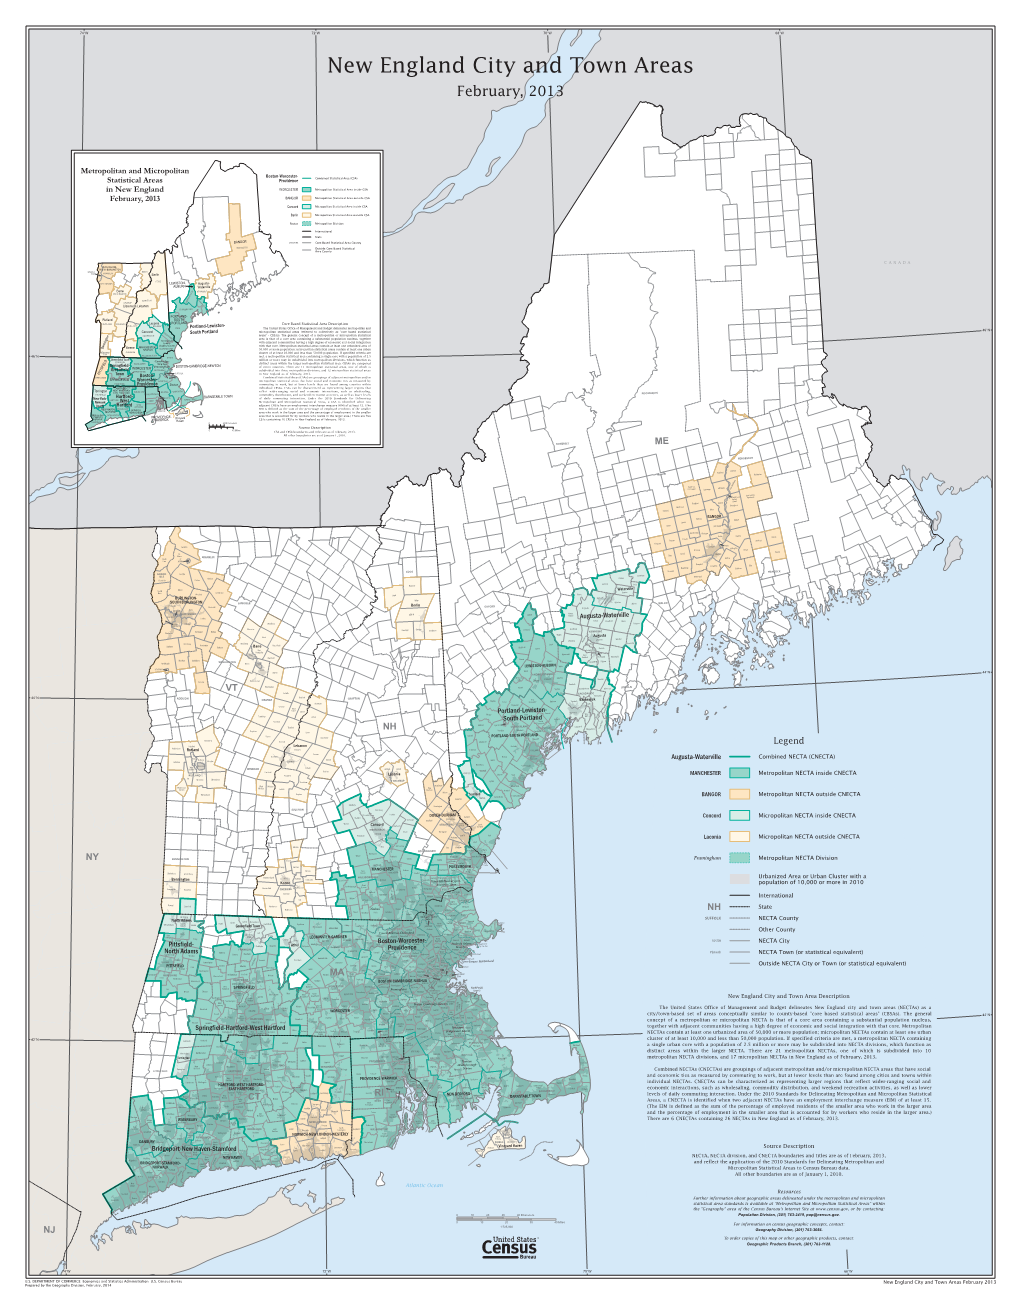 New England City and Town Areas, February 2013